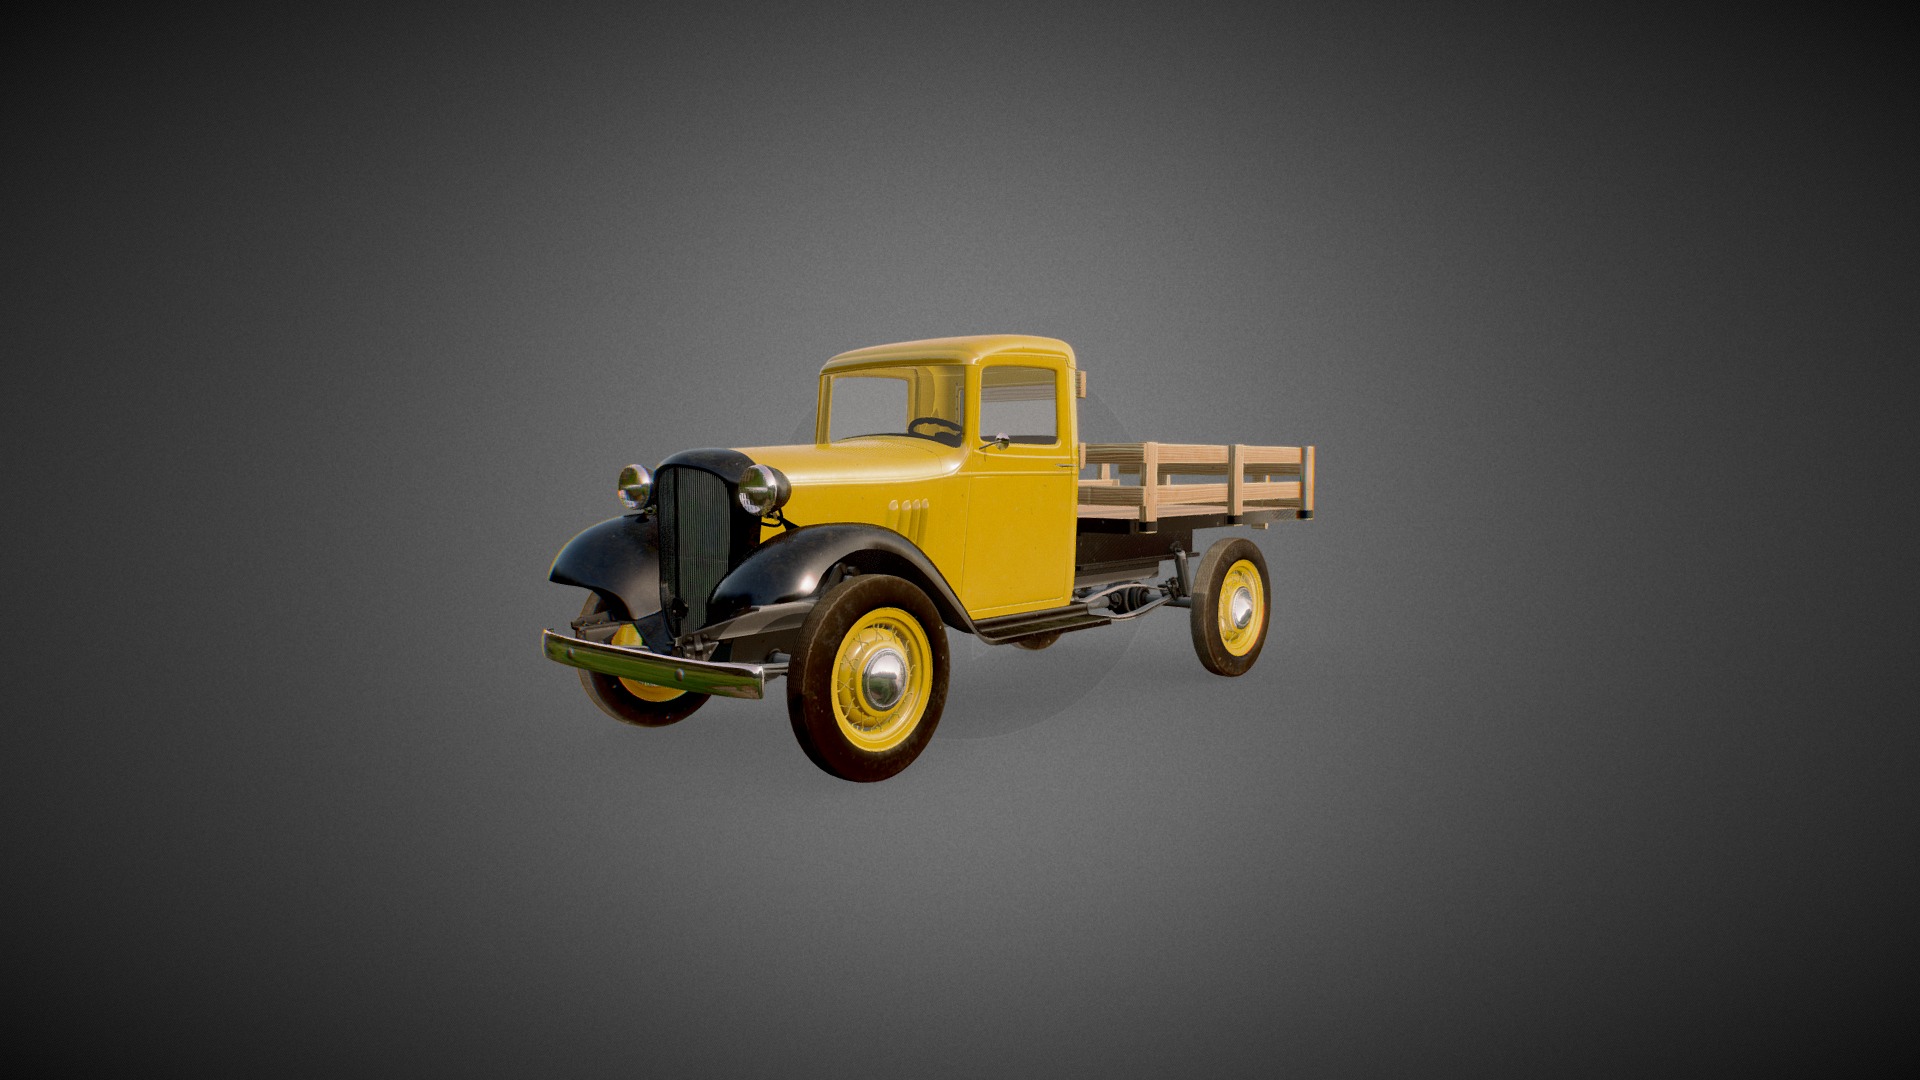 3D model 1930s Chevy Pickup Truck - This is a 3D model of the 1930s Chevy Pickup Truck. The 3D model is about a toy truck on a grey background.